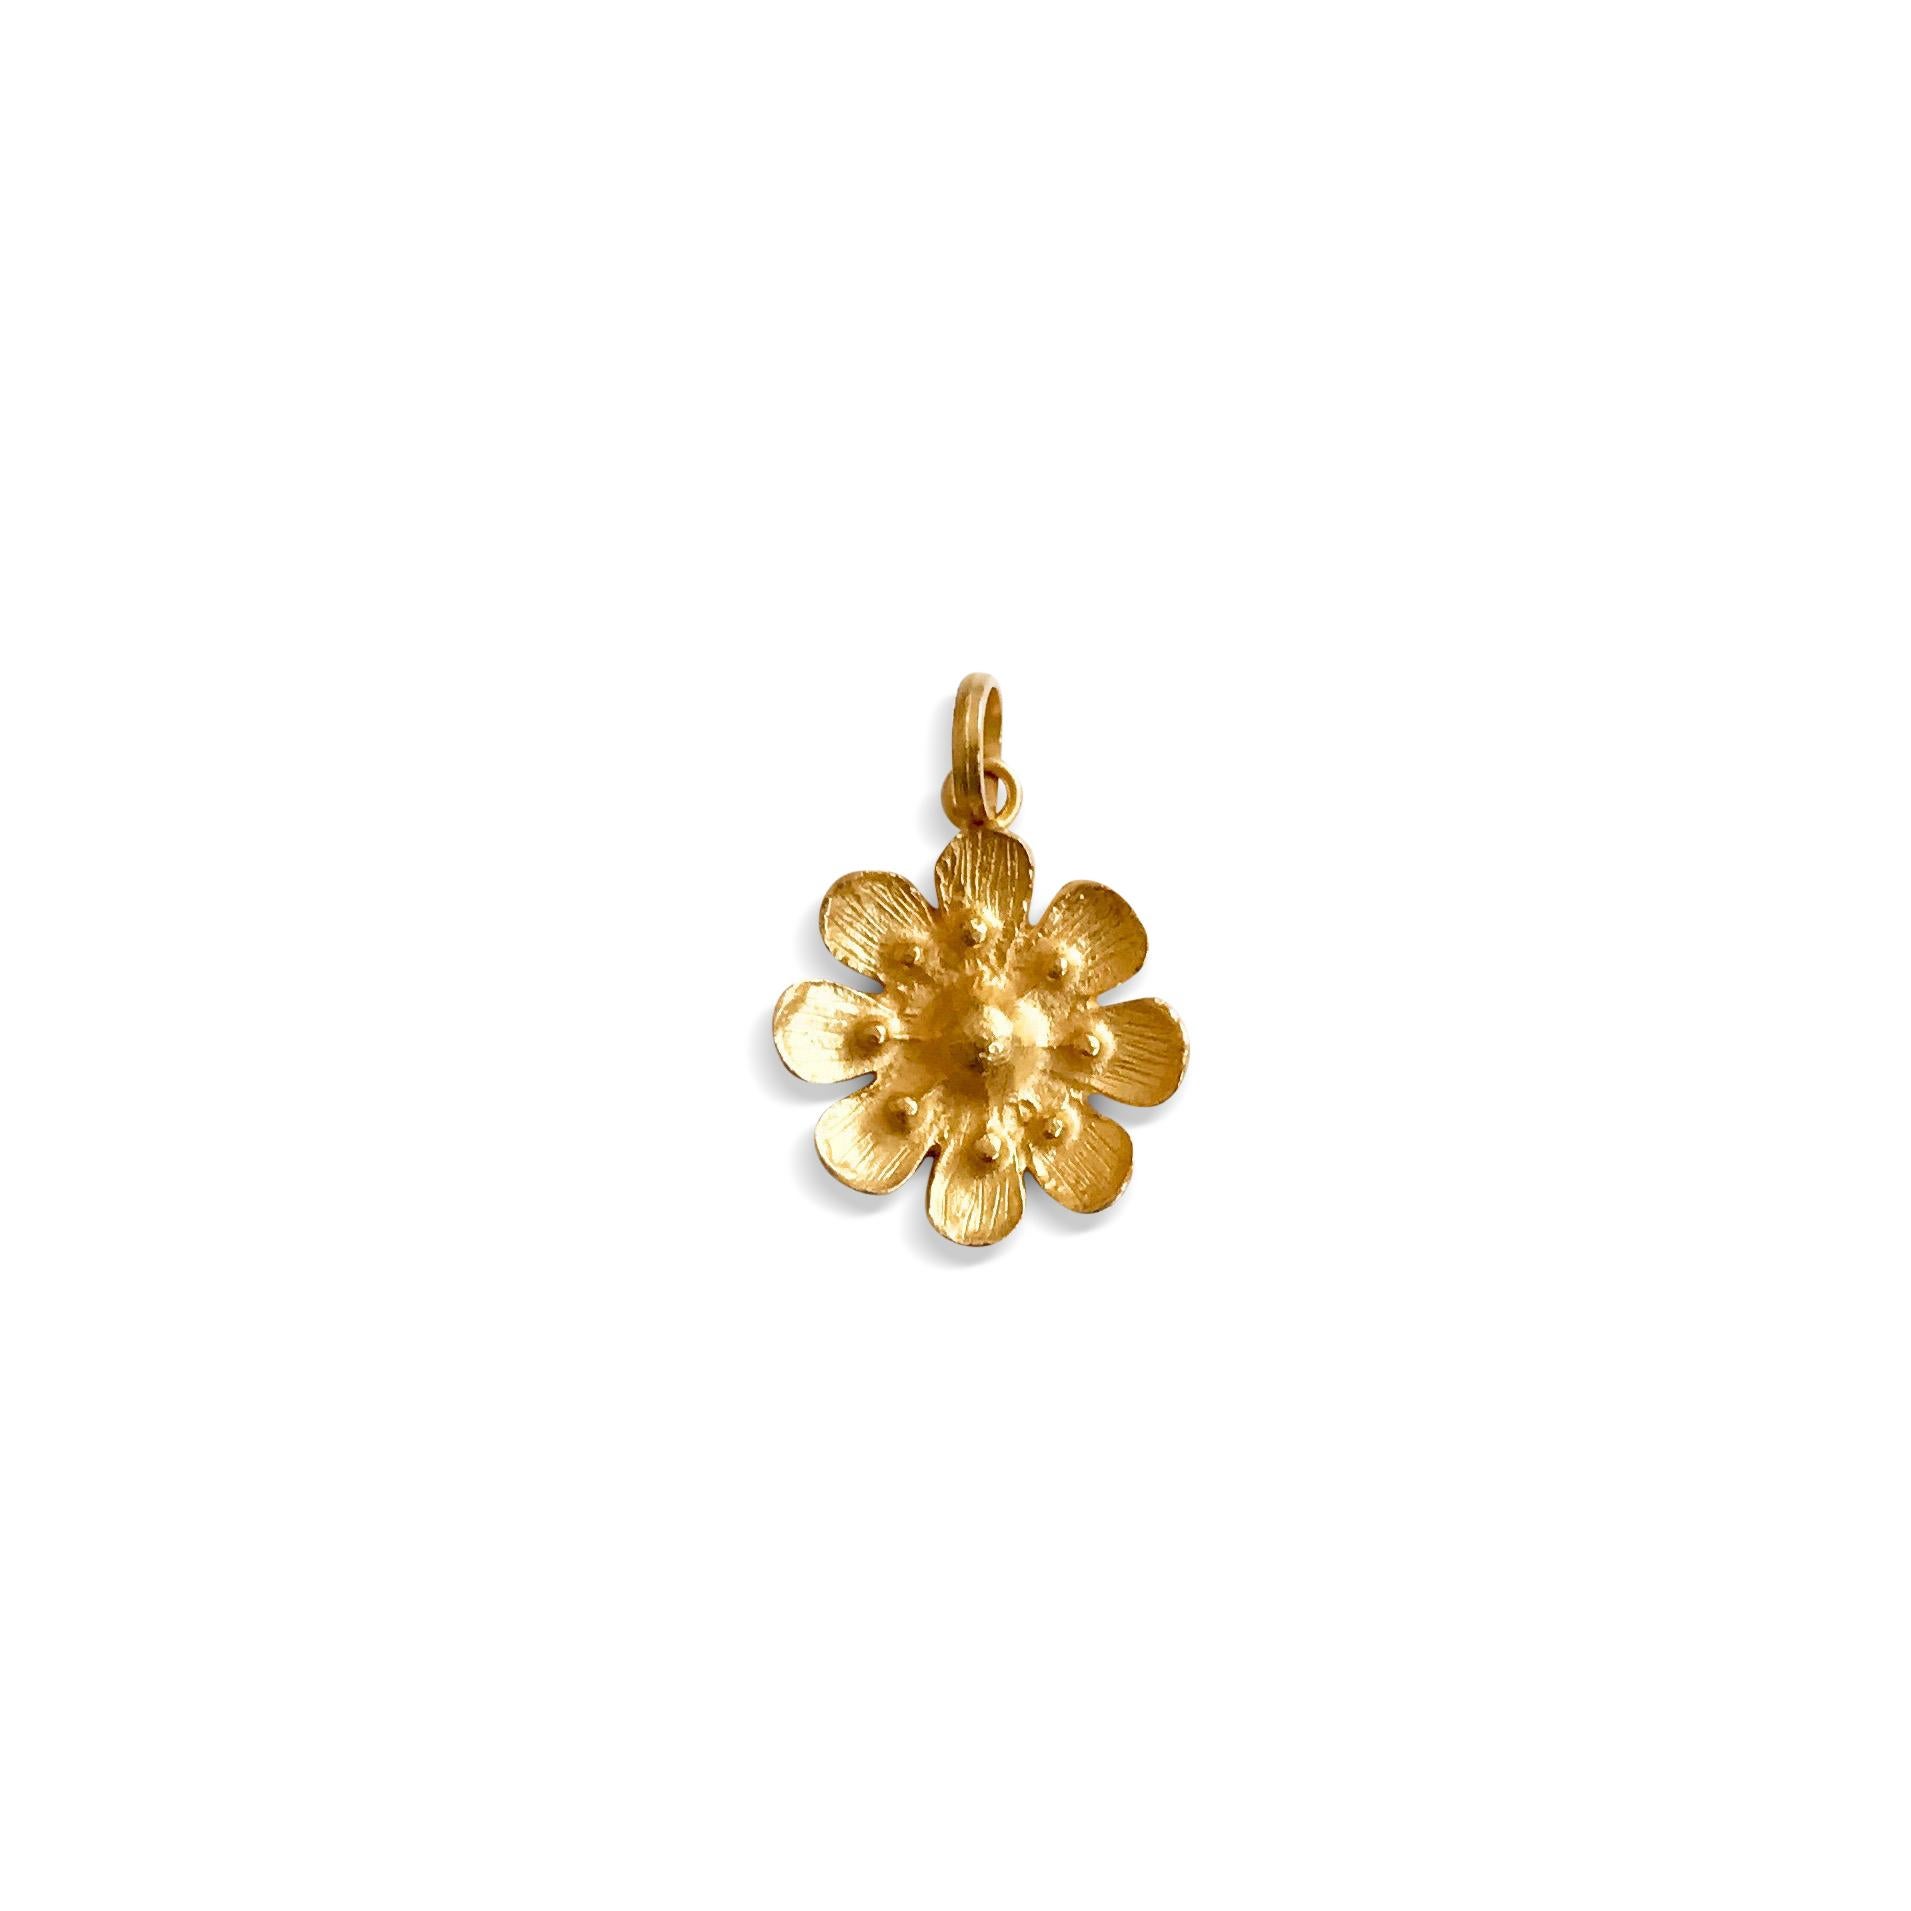 18 Karat solid yellow gold daisy flower pendant necklace in a satin finish. 
The pendant can be purchased separately without the chain if desired. 
Hallmark: London's  Goldsmiths' Company -  Assay Office
Flower's width: 19.00mm
Flower's depth: 3.5